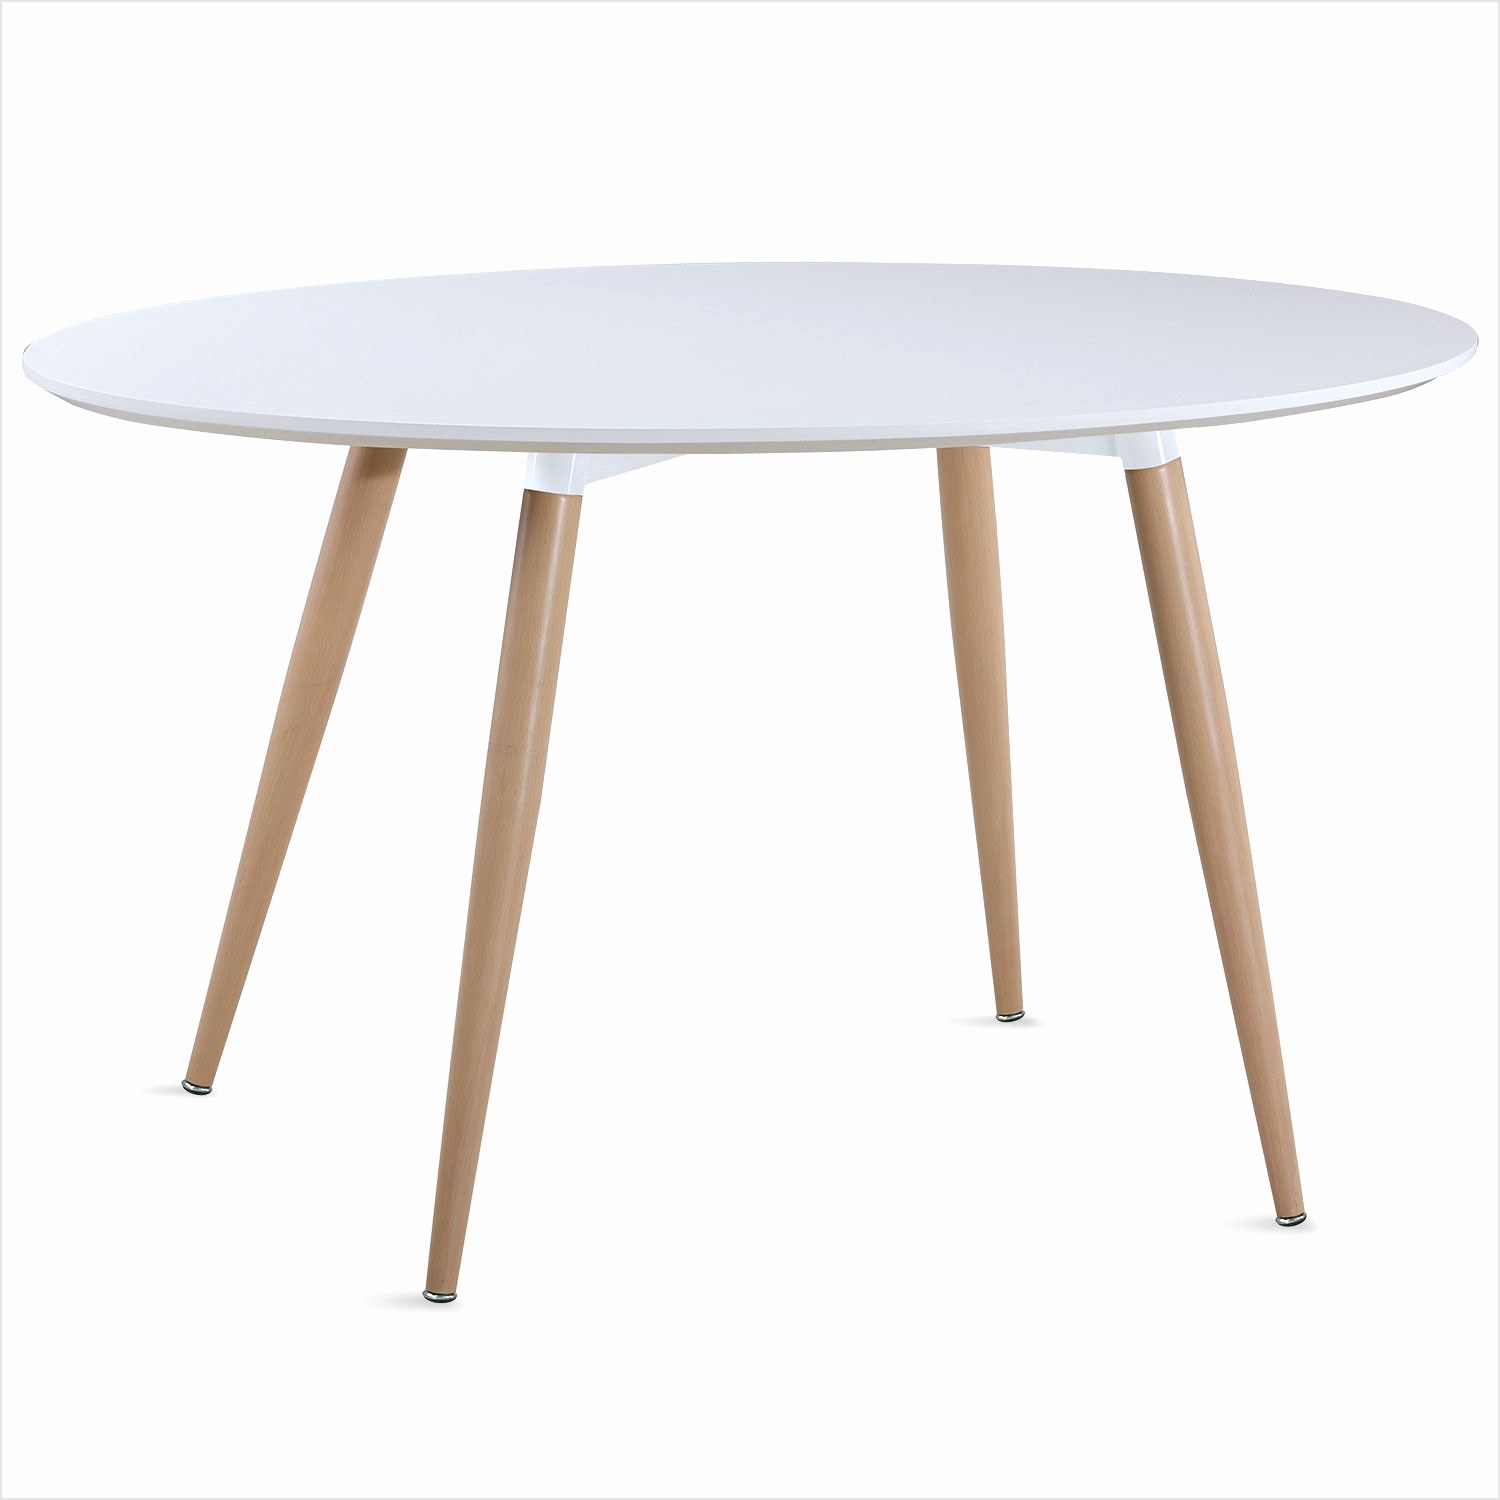 Spring table basse scandinave blanche